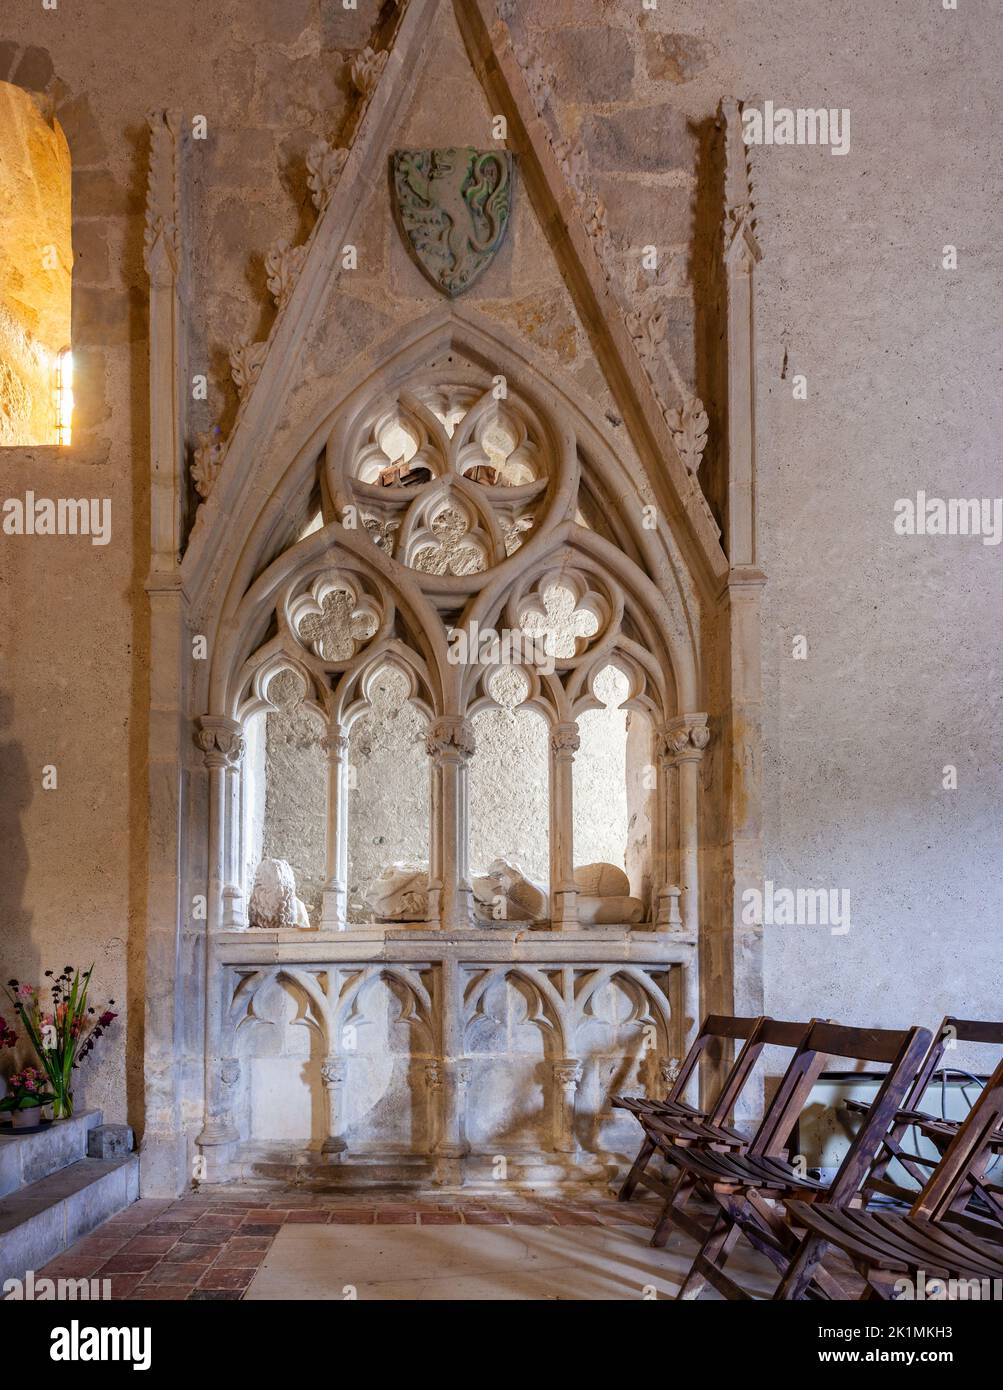 Interior of the Chapel of Caubin along the route of Chemin du Puy in the canton of Arthez-de-Béarn. Inside in a Gothic crypt is the effigy of a knight Stock Photo